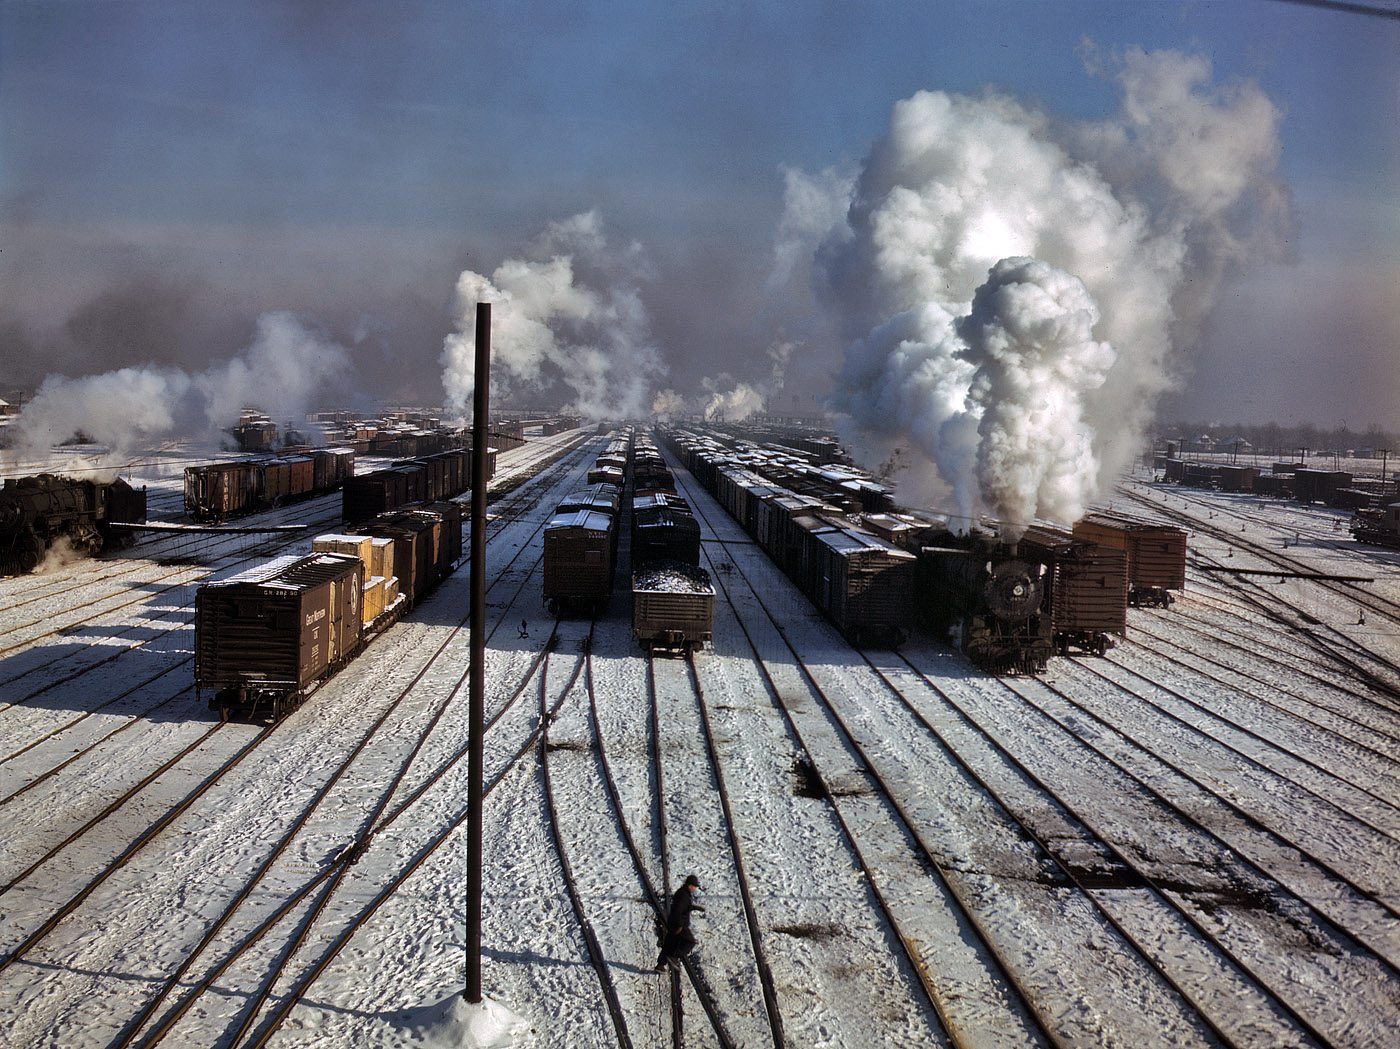 December 1942. Proviso classification yard of the Chicago & North Western Railroad. View full size. 4x5 Kodachrome transparency by Jack Delano.